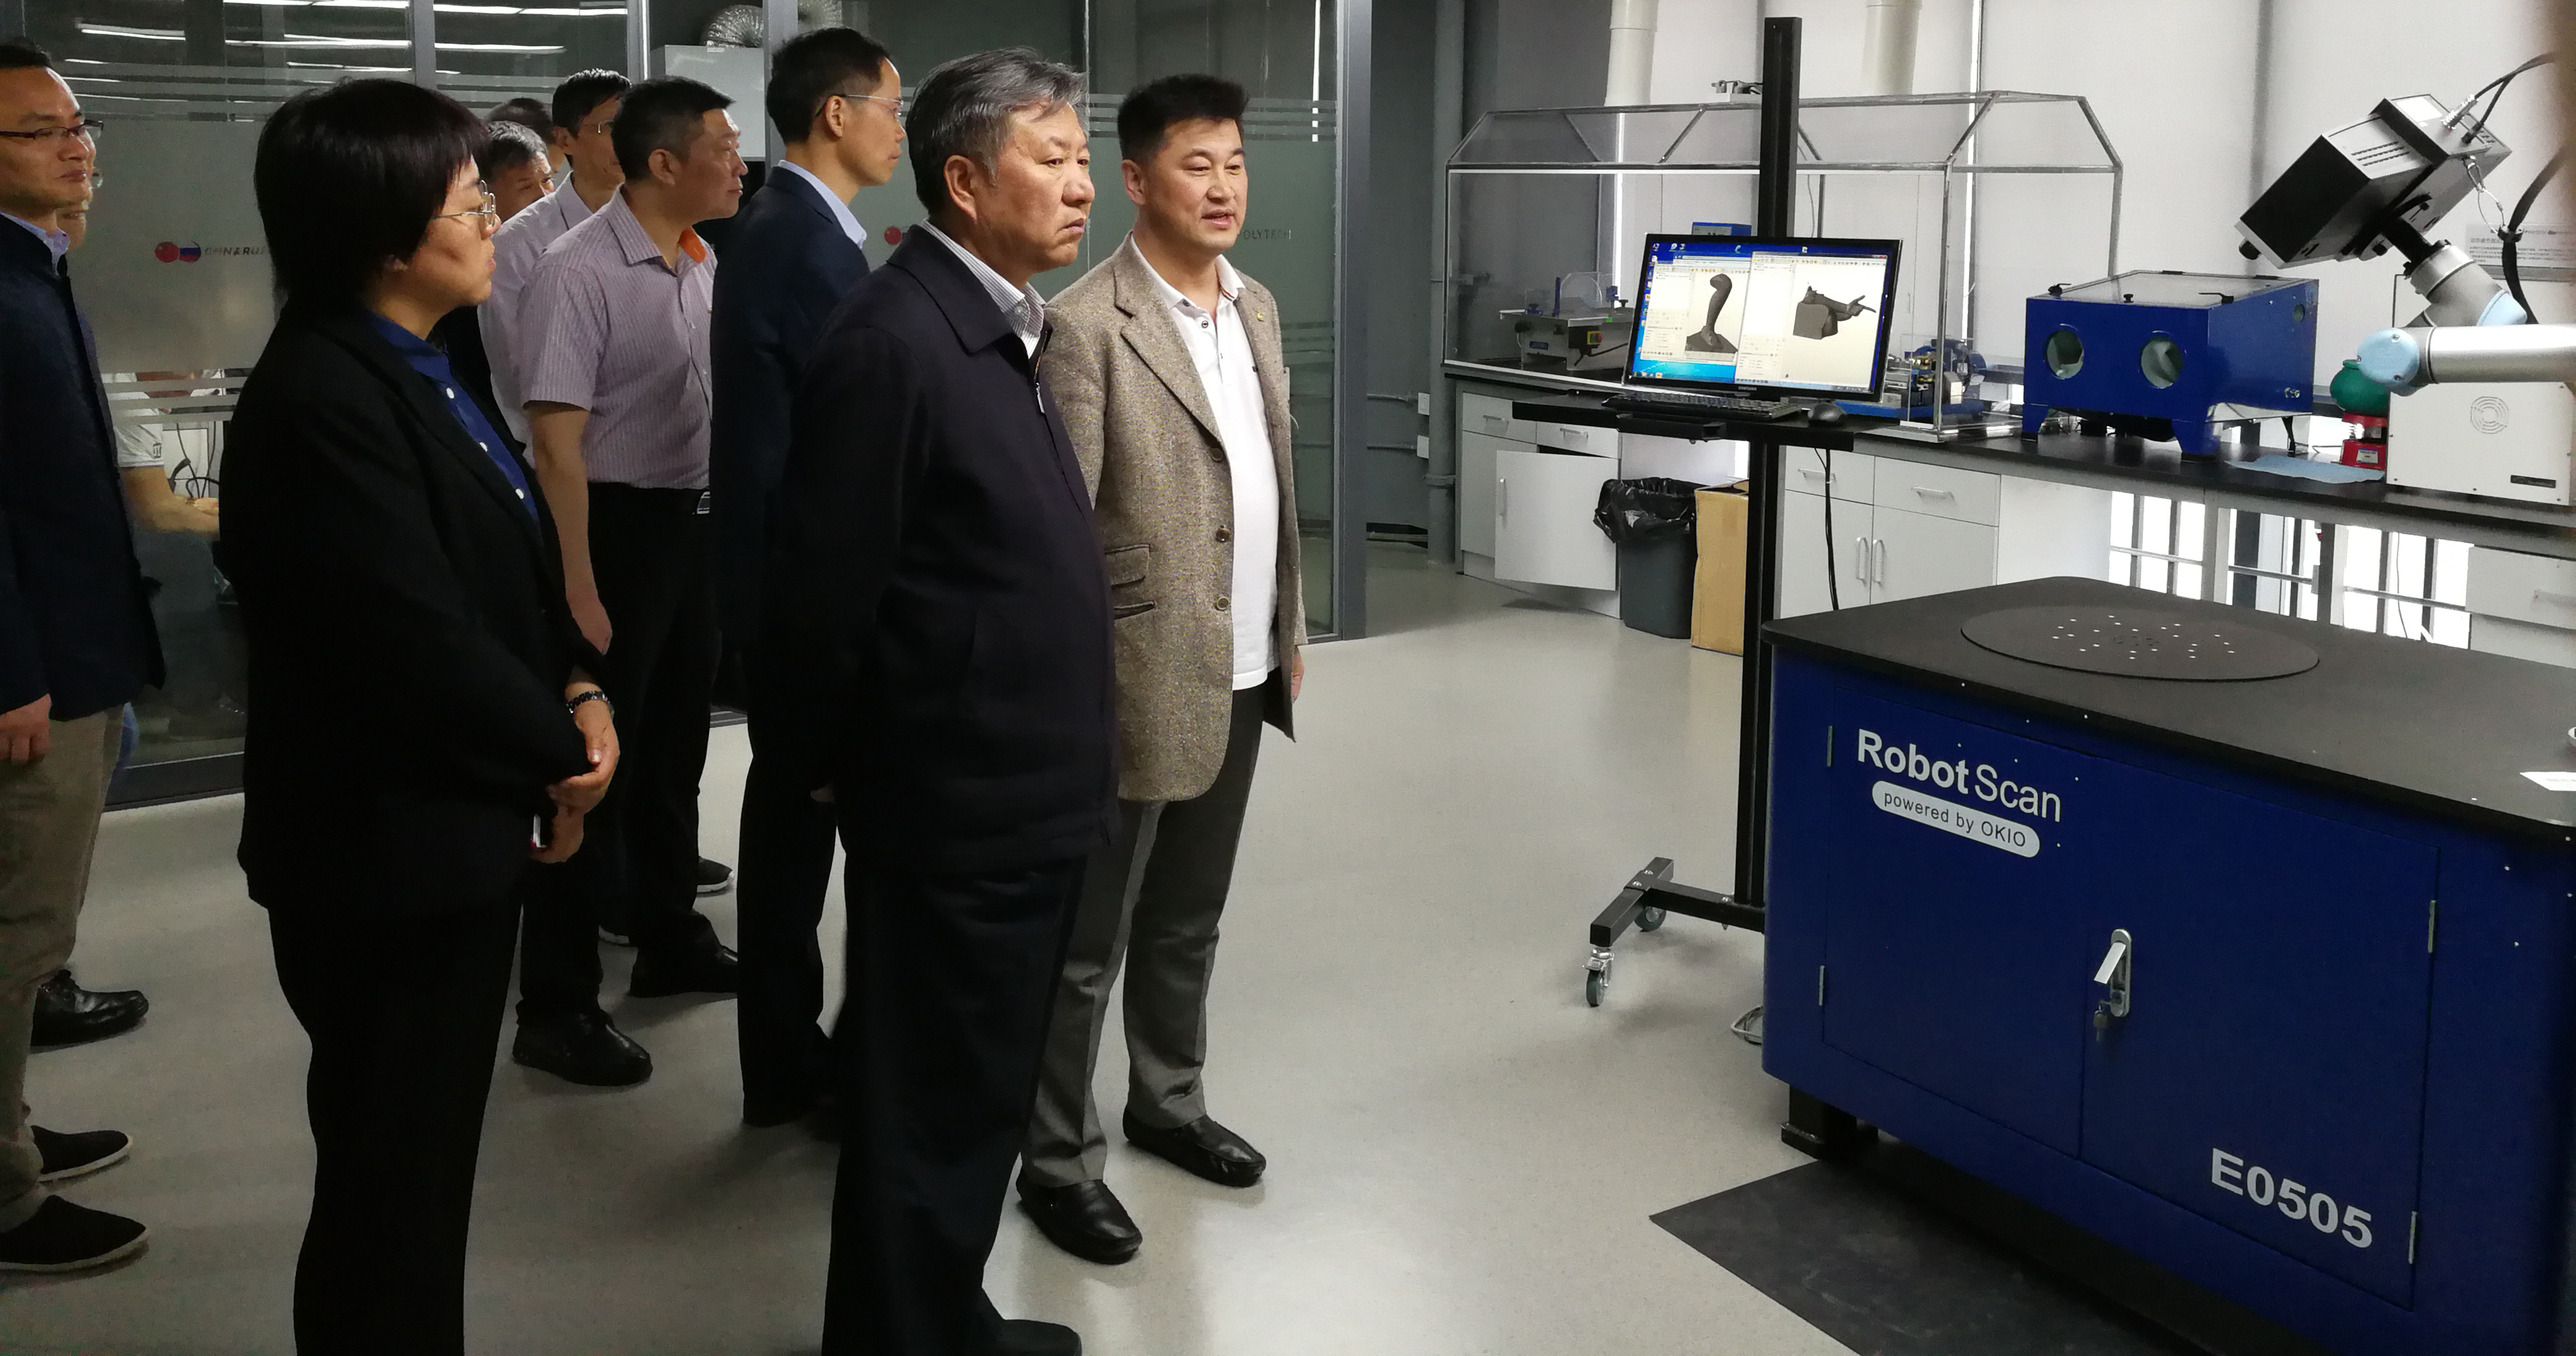 Zhejiang Province Intelligent Manufacturing Expert Committee Chairman Mao and experts visited the Institute